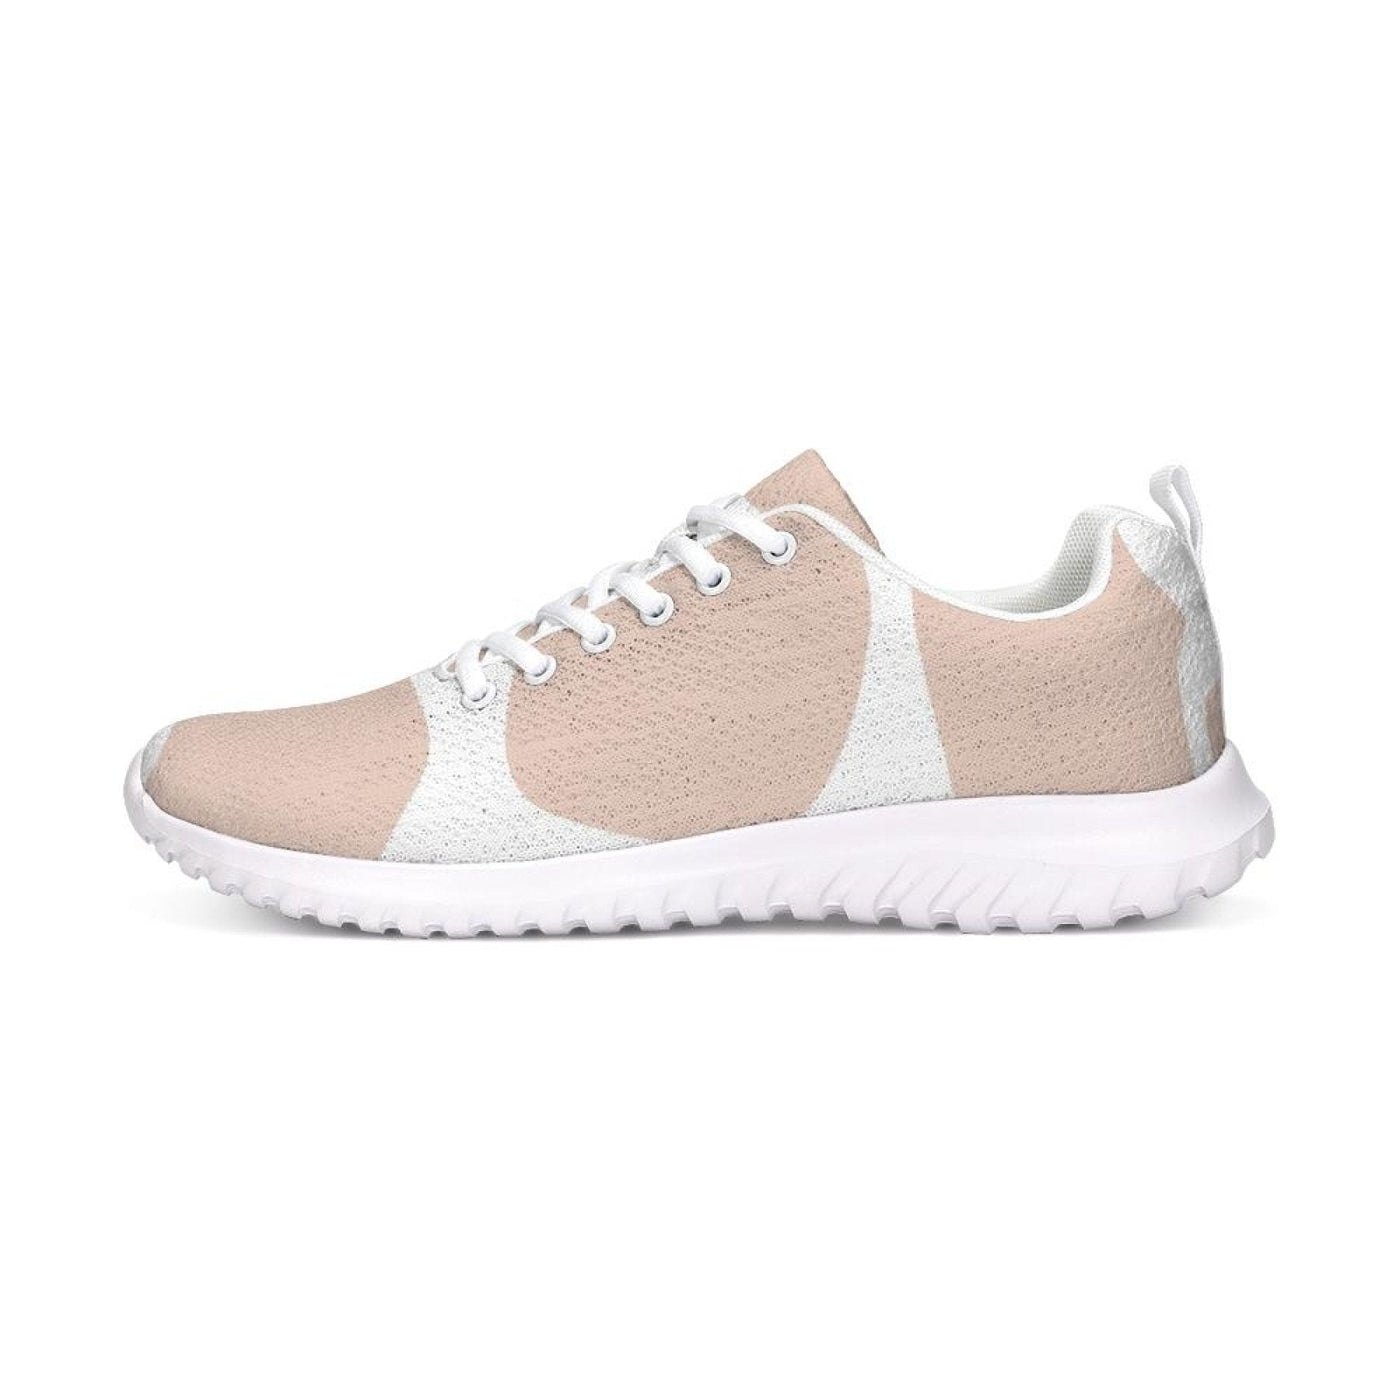 Womens Sneakers - Pink & White Low Top Canvas Running Shoes - Womens | Sneakers